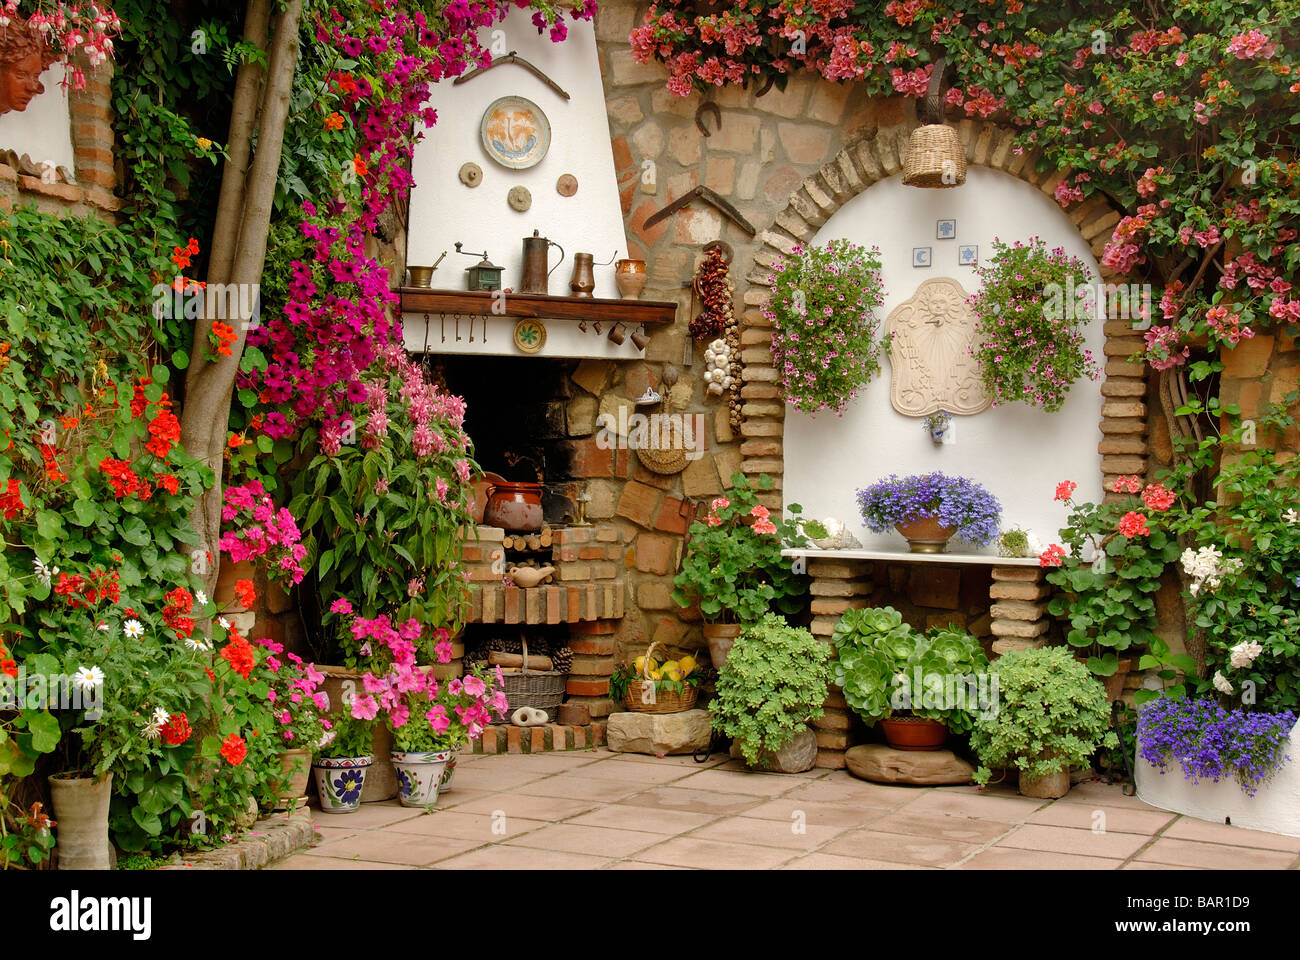 Andalucia Patio Patios de Mayo flowers in bloom Spain Spanish Patios Stock Photo